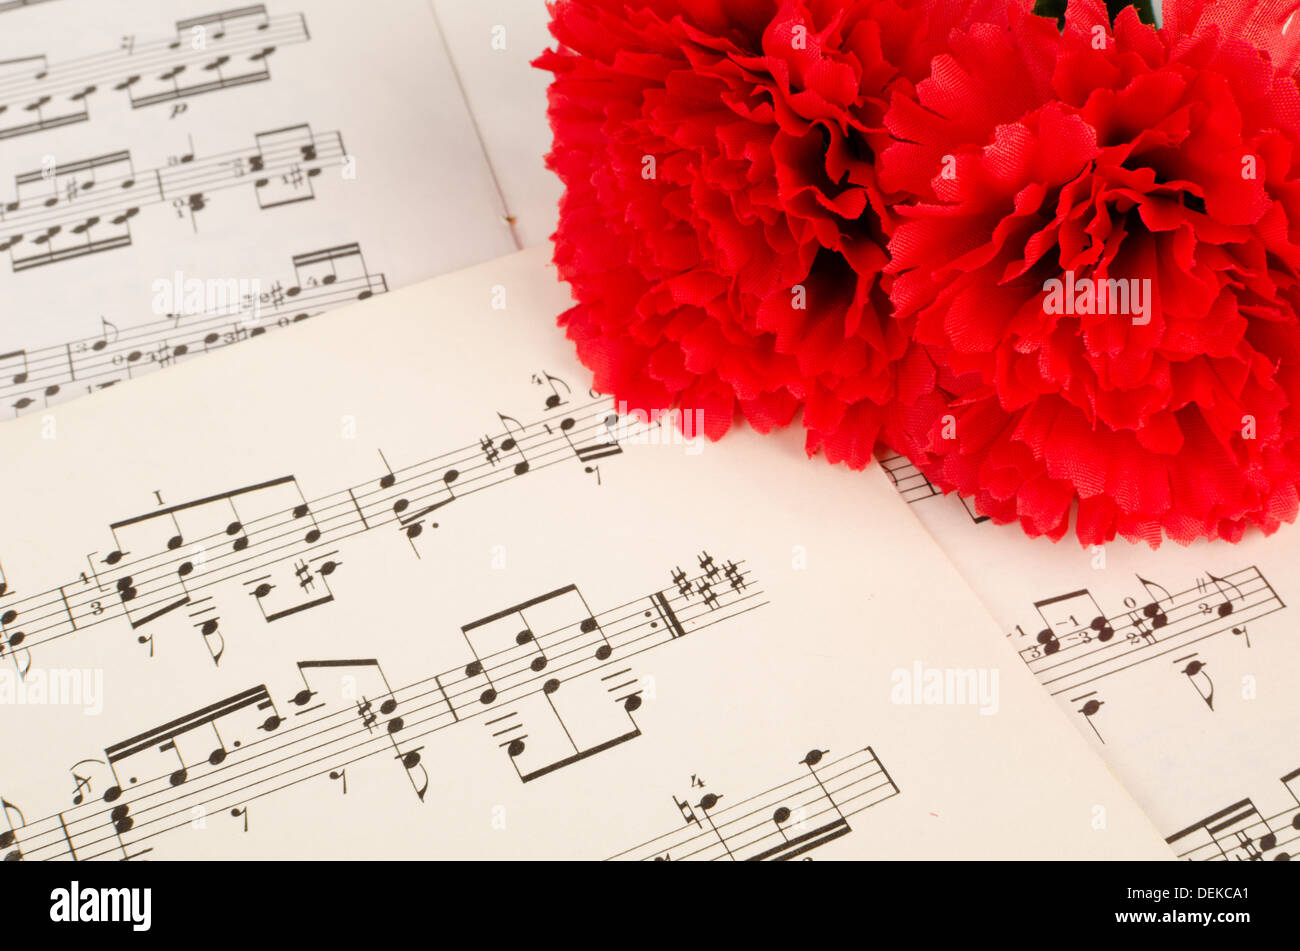 Carnation And Notes On Paper A Spanish Music Background DEKCA1 